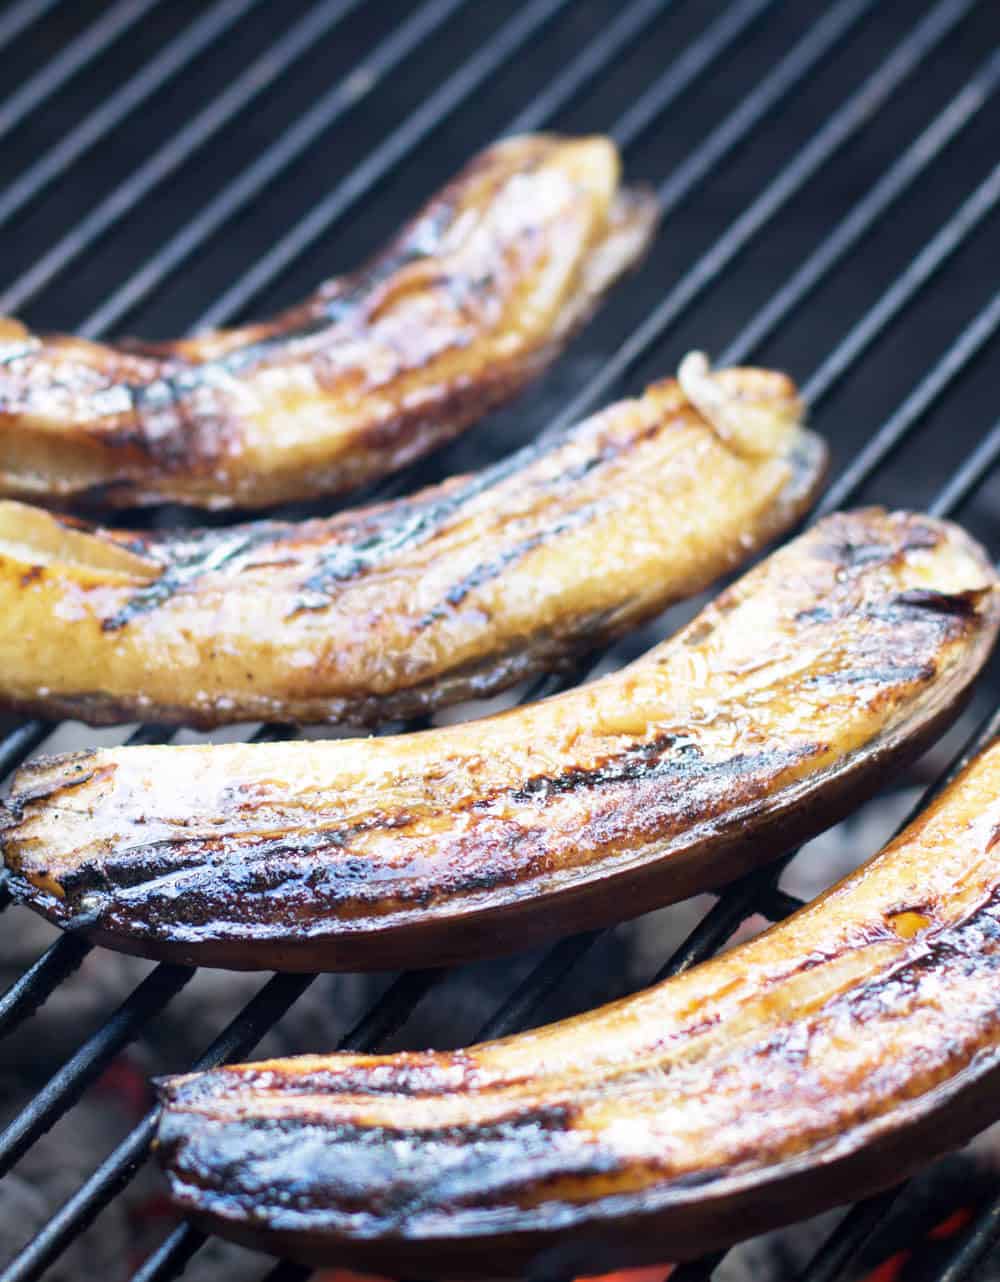 Easy Rum-Glazed grilled bananas on almost done on grill